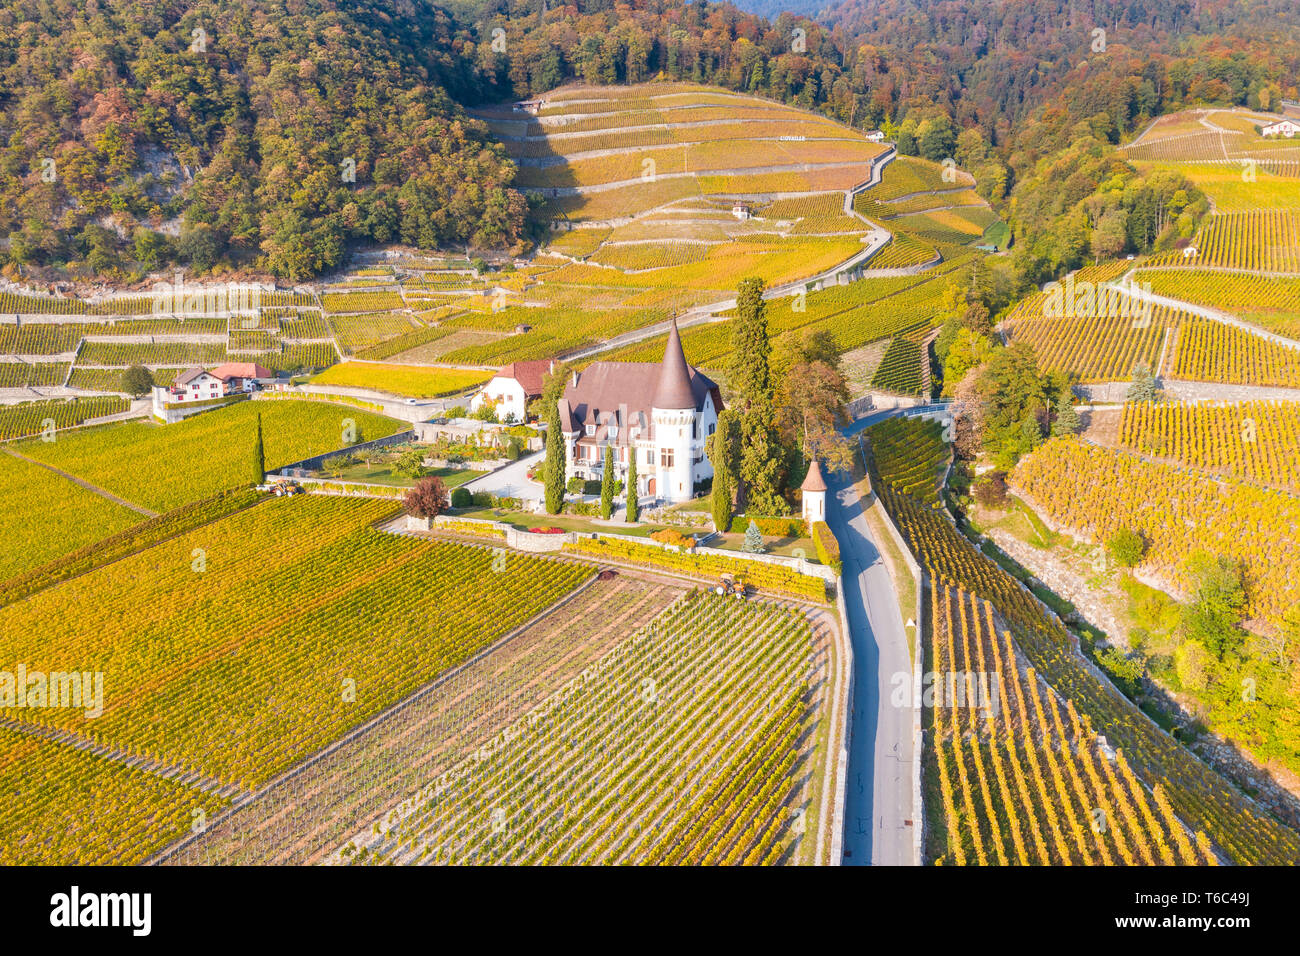 Chateau Maison Blanche, Yvorne, Canton of Vaud, Switzerland Stock Photo